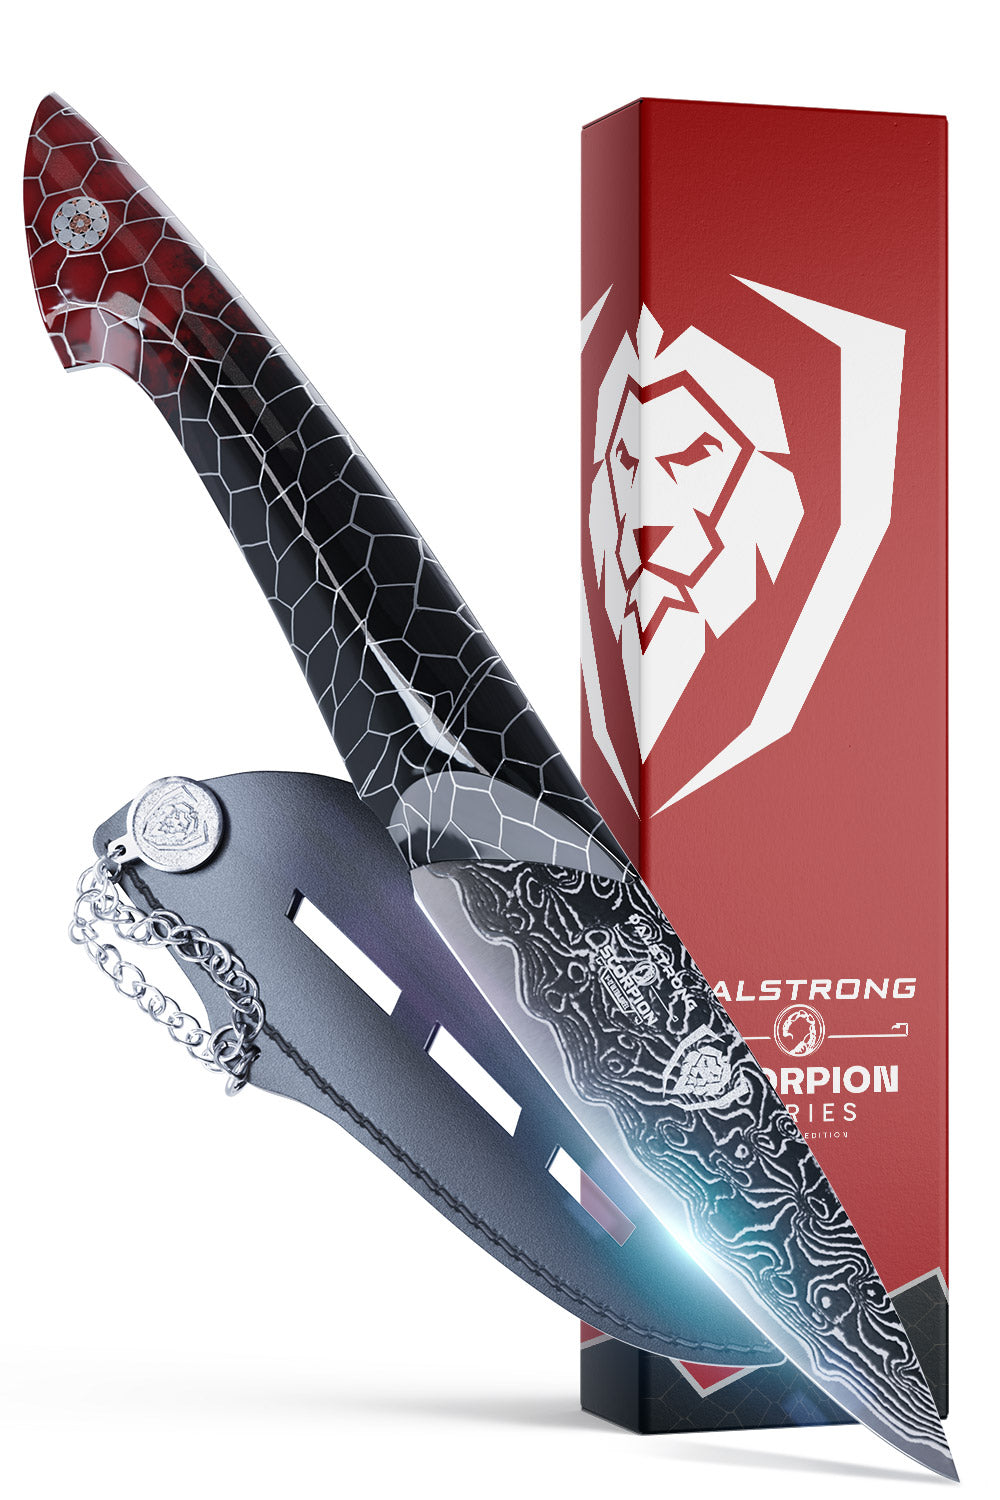 Paring Knife 4" | Scorpion Series | Dalstrong ©